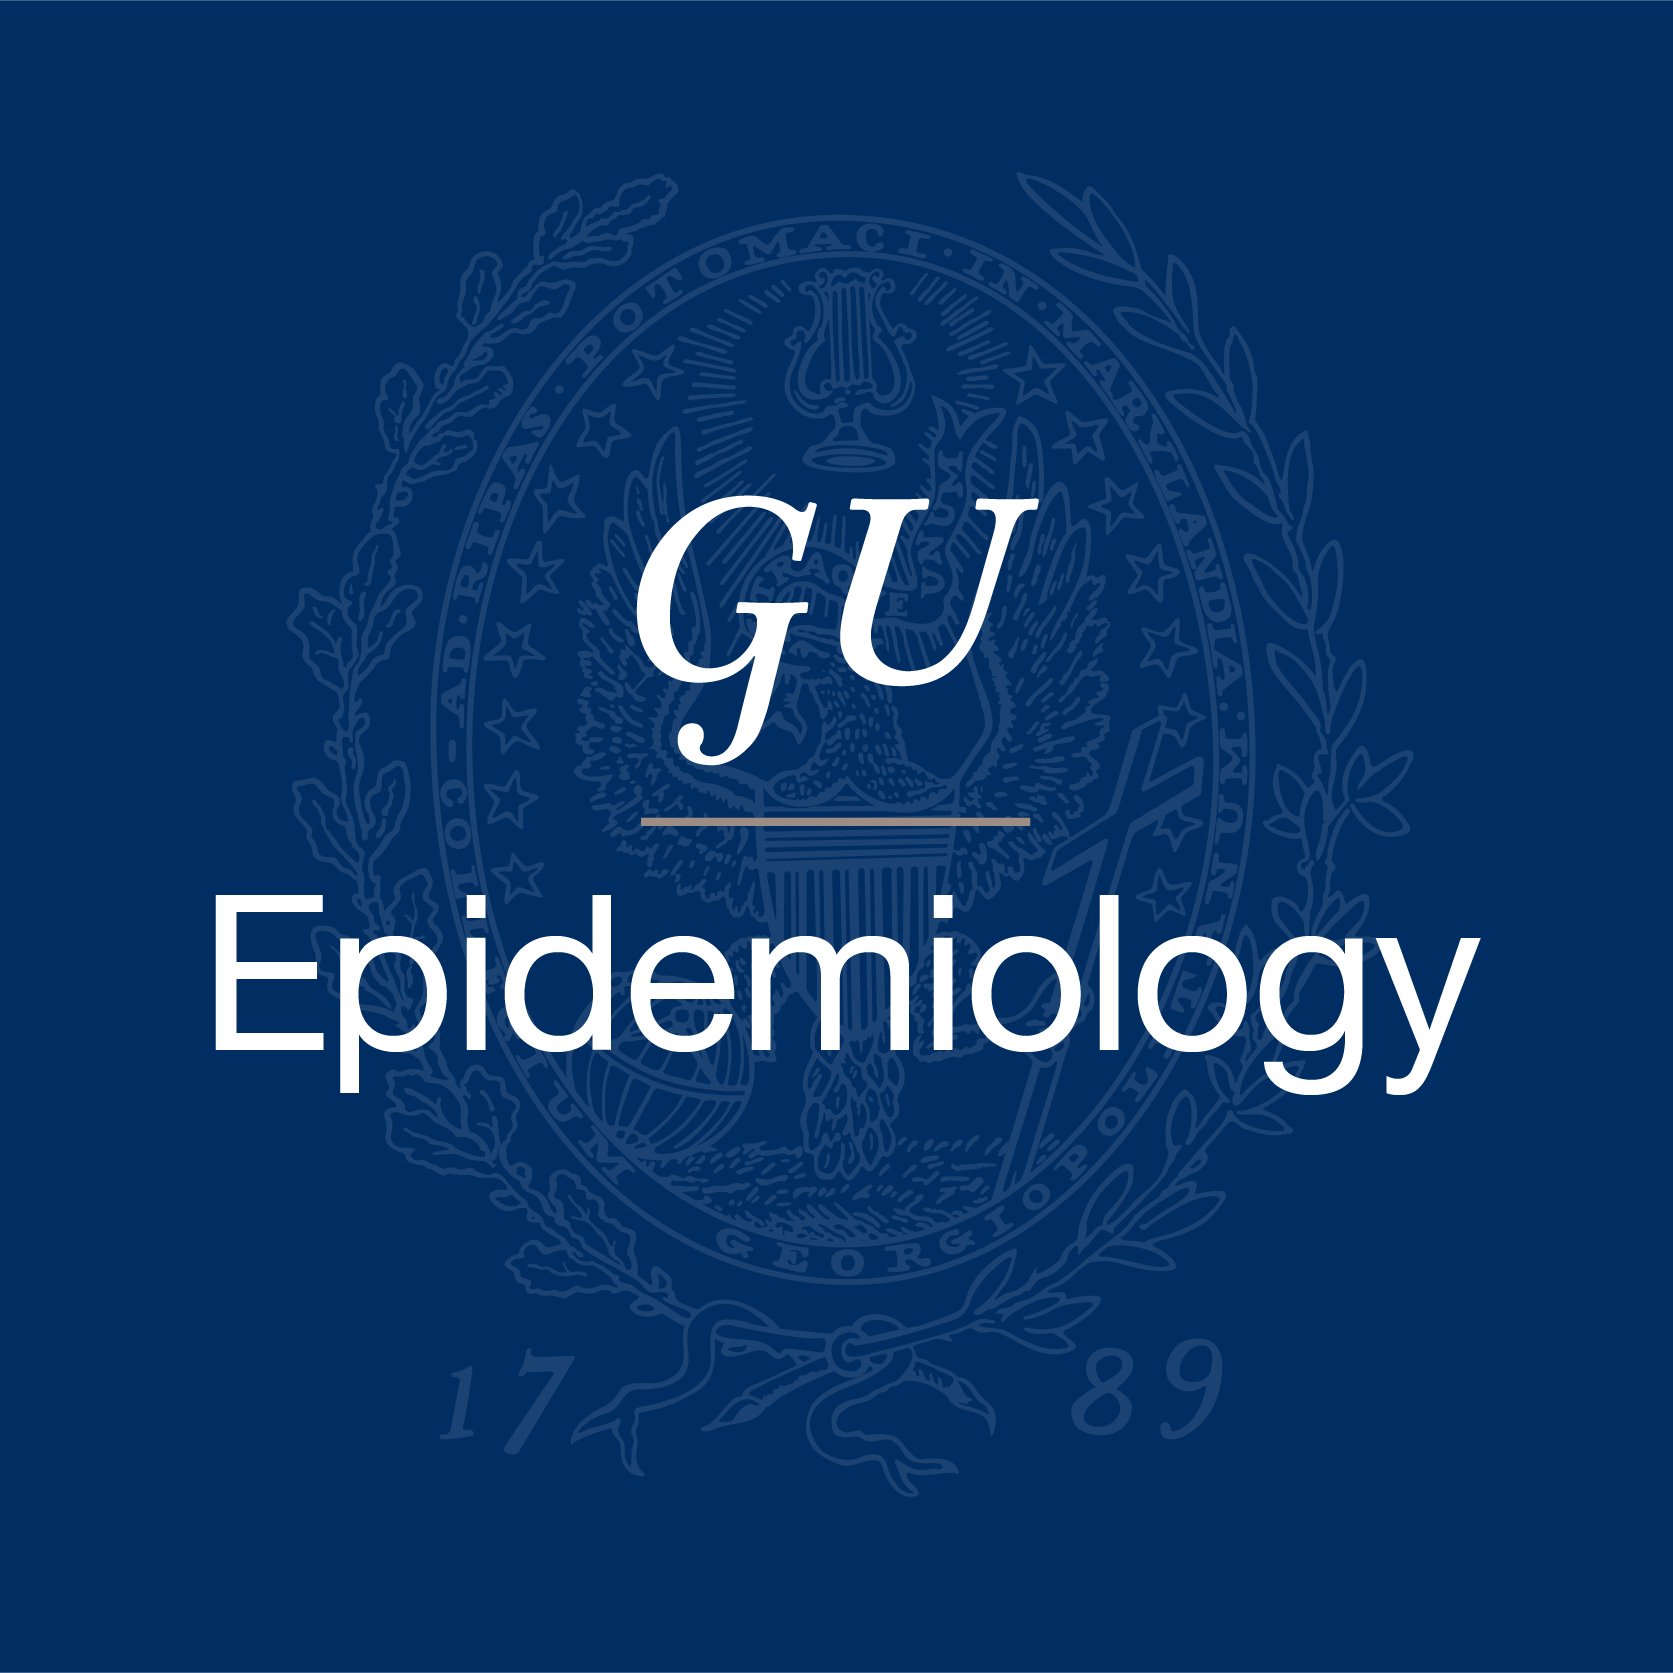 The interdisciplinary Epidemiology program @Georgetown is guided by the theme of Health Disparities, motivated by the university's commitment to social justice.